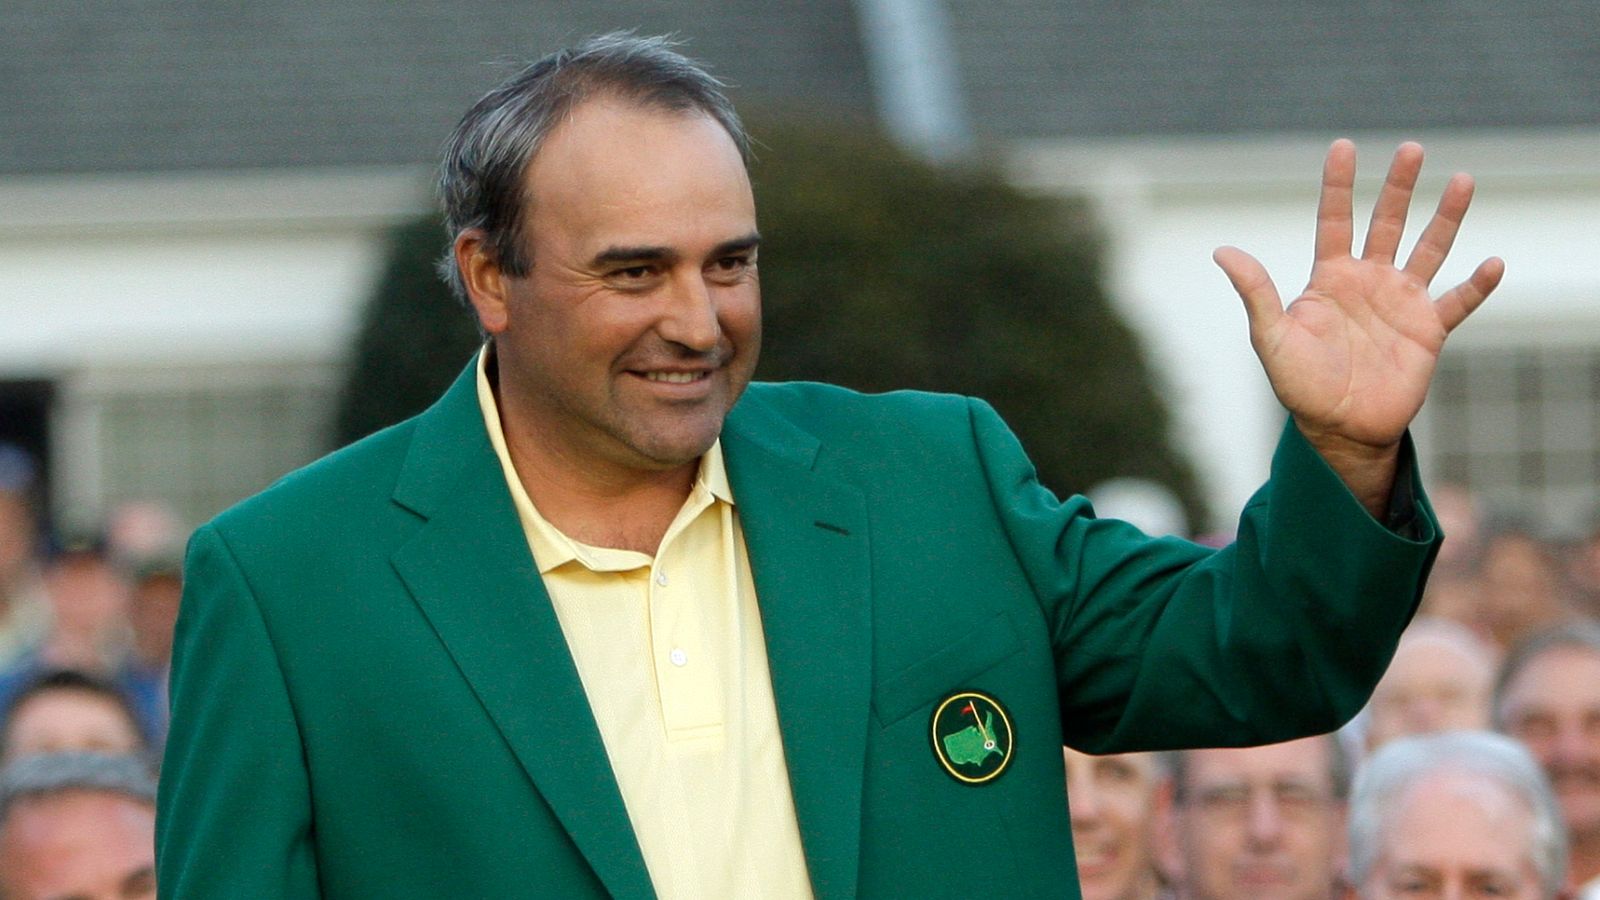 Angel Cabrera reinstated to PGA Tour and PGA Tour Champions after ...